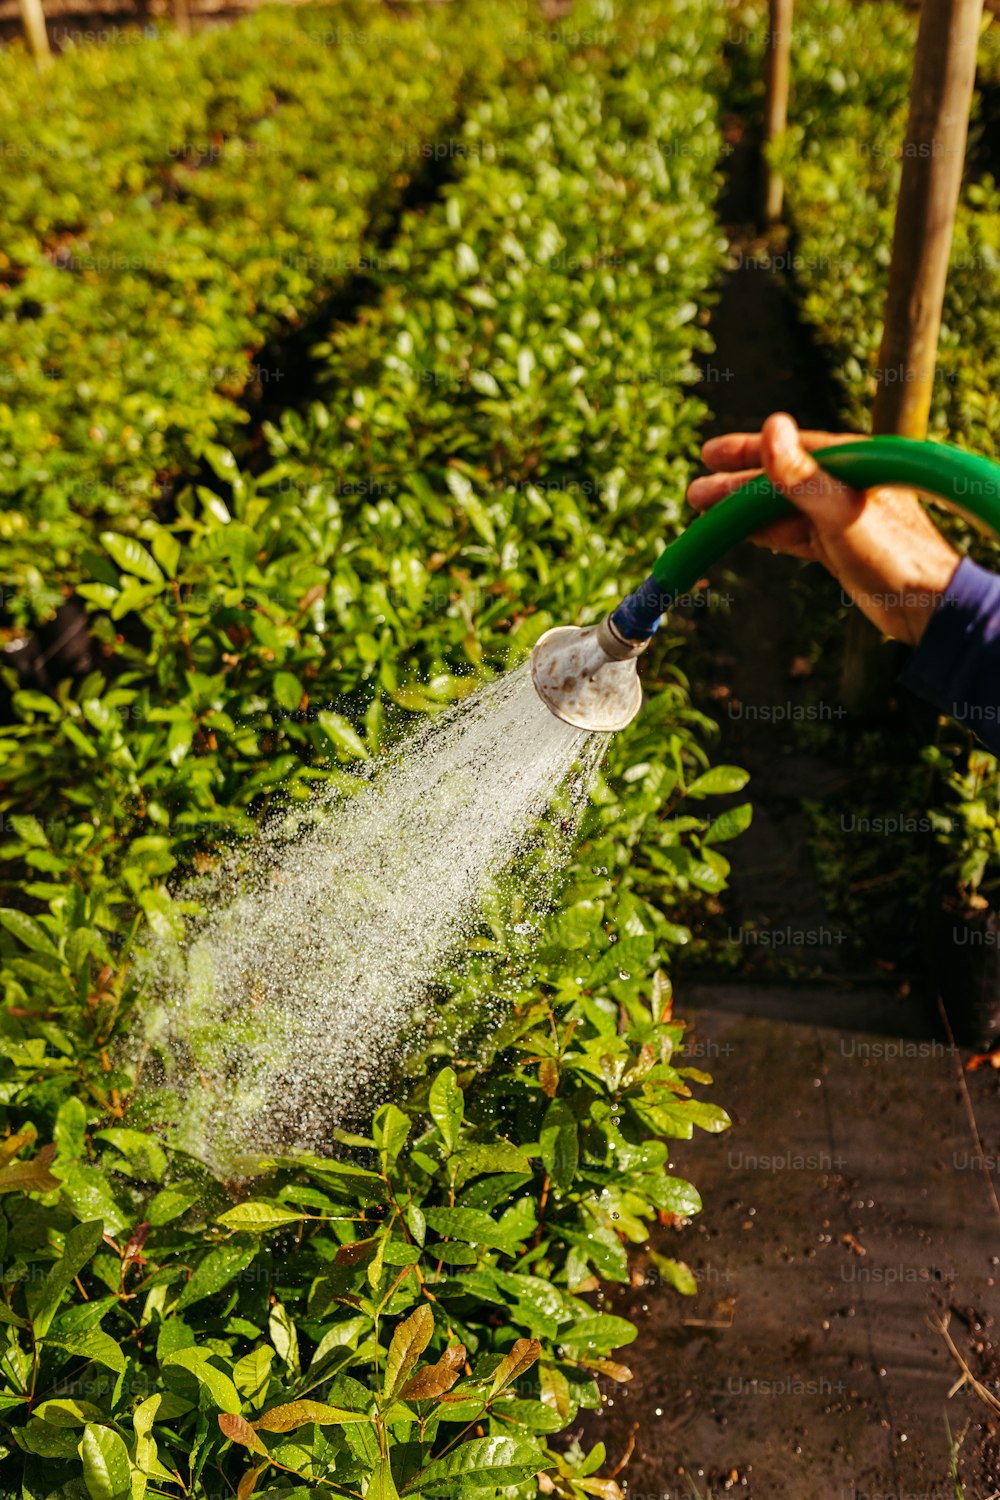 a person is spraying water on a plant